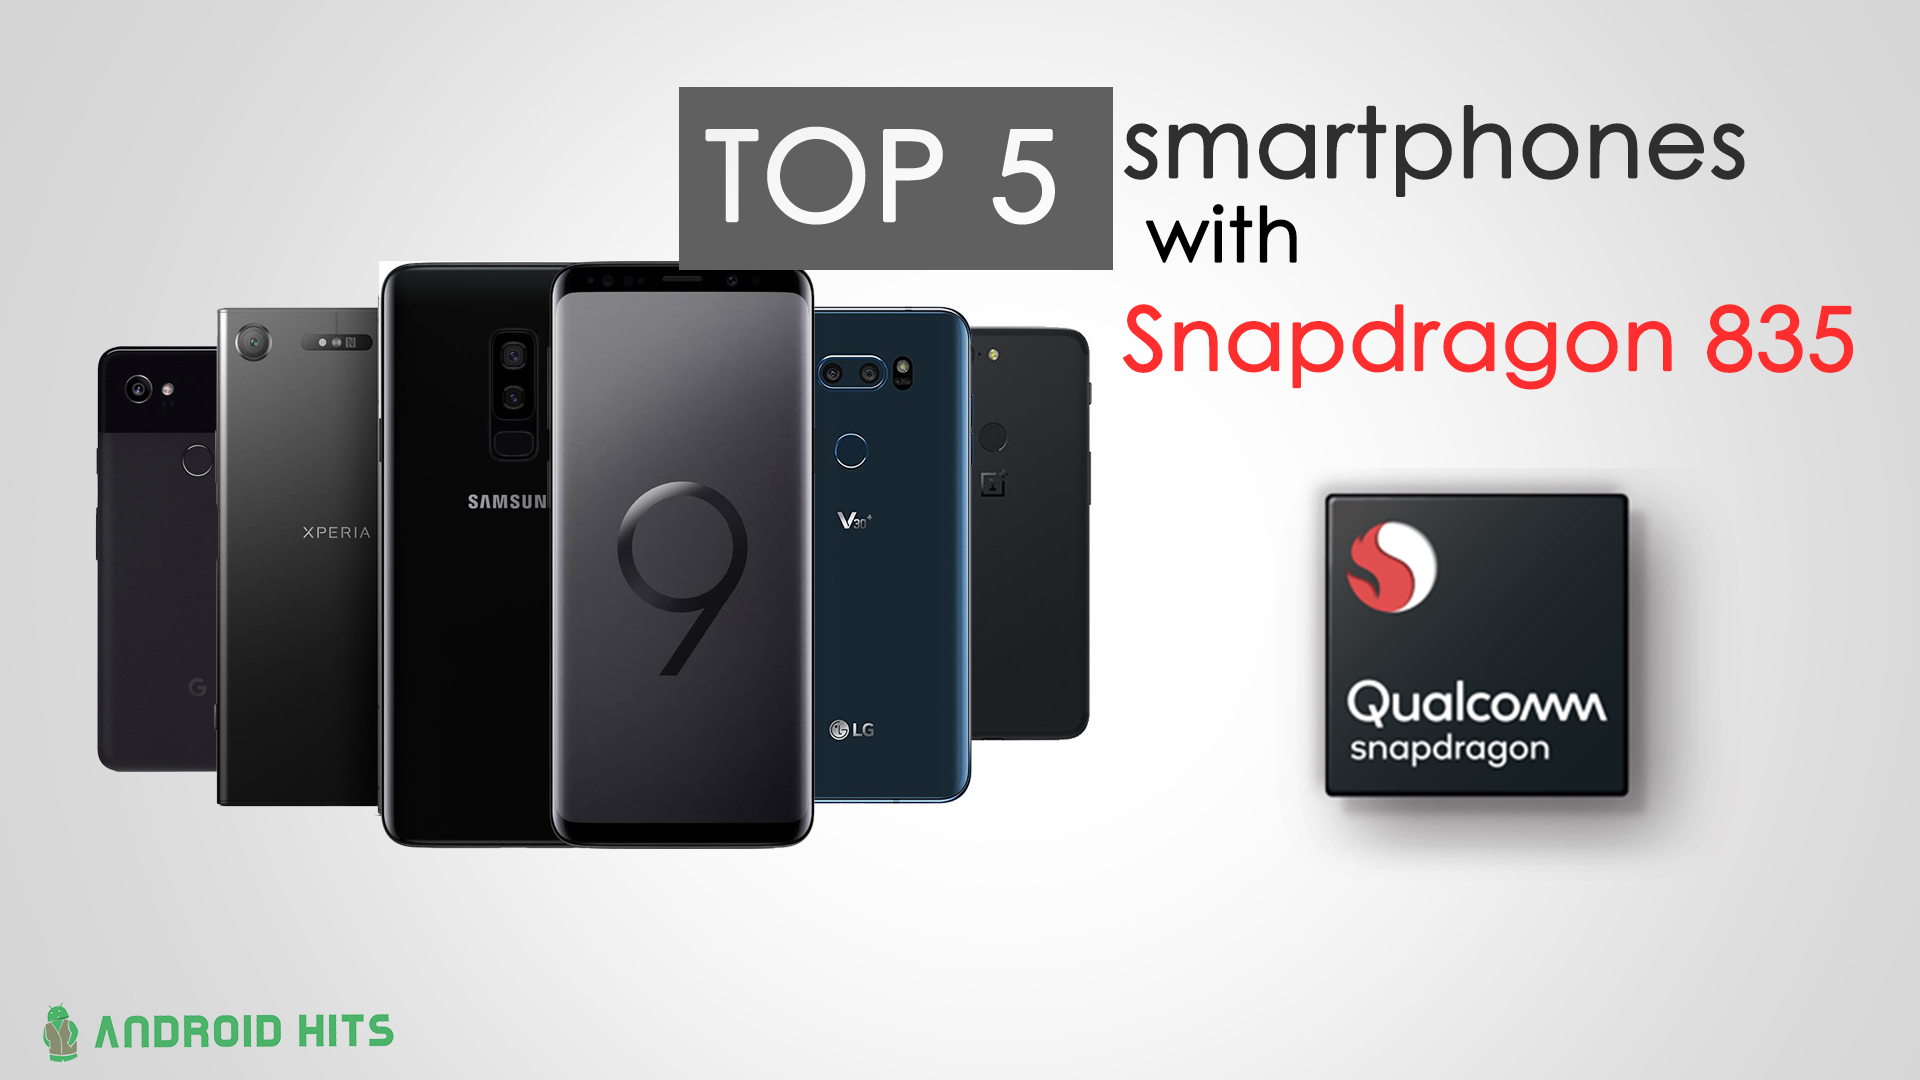 Top 5 Smartphones with Qualcomm Snapdragon 835 in India